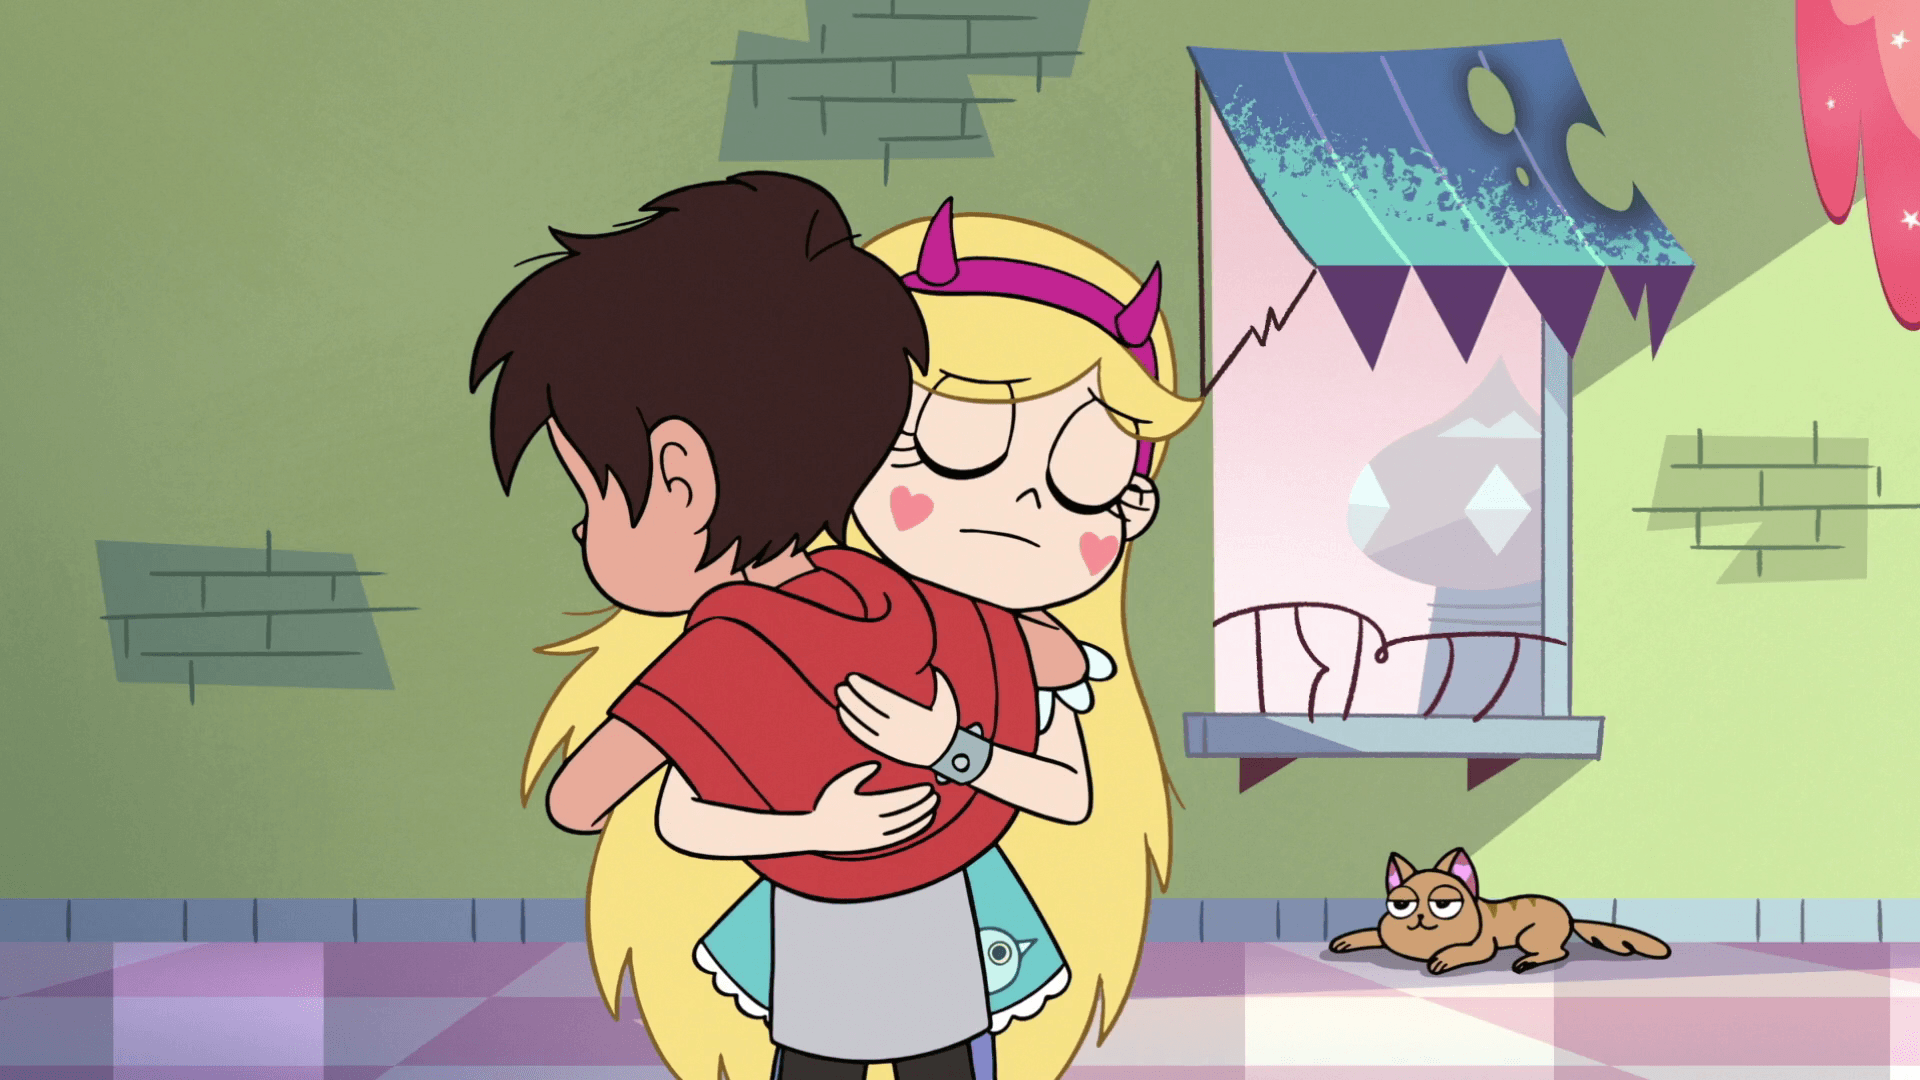 Star Butterfly. Star vs. the Forces of Evil